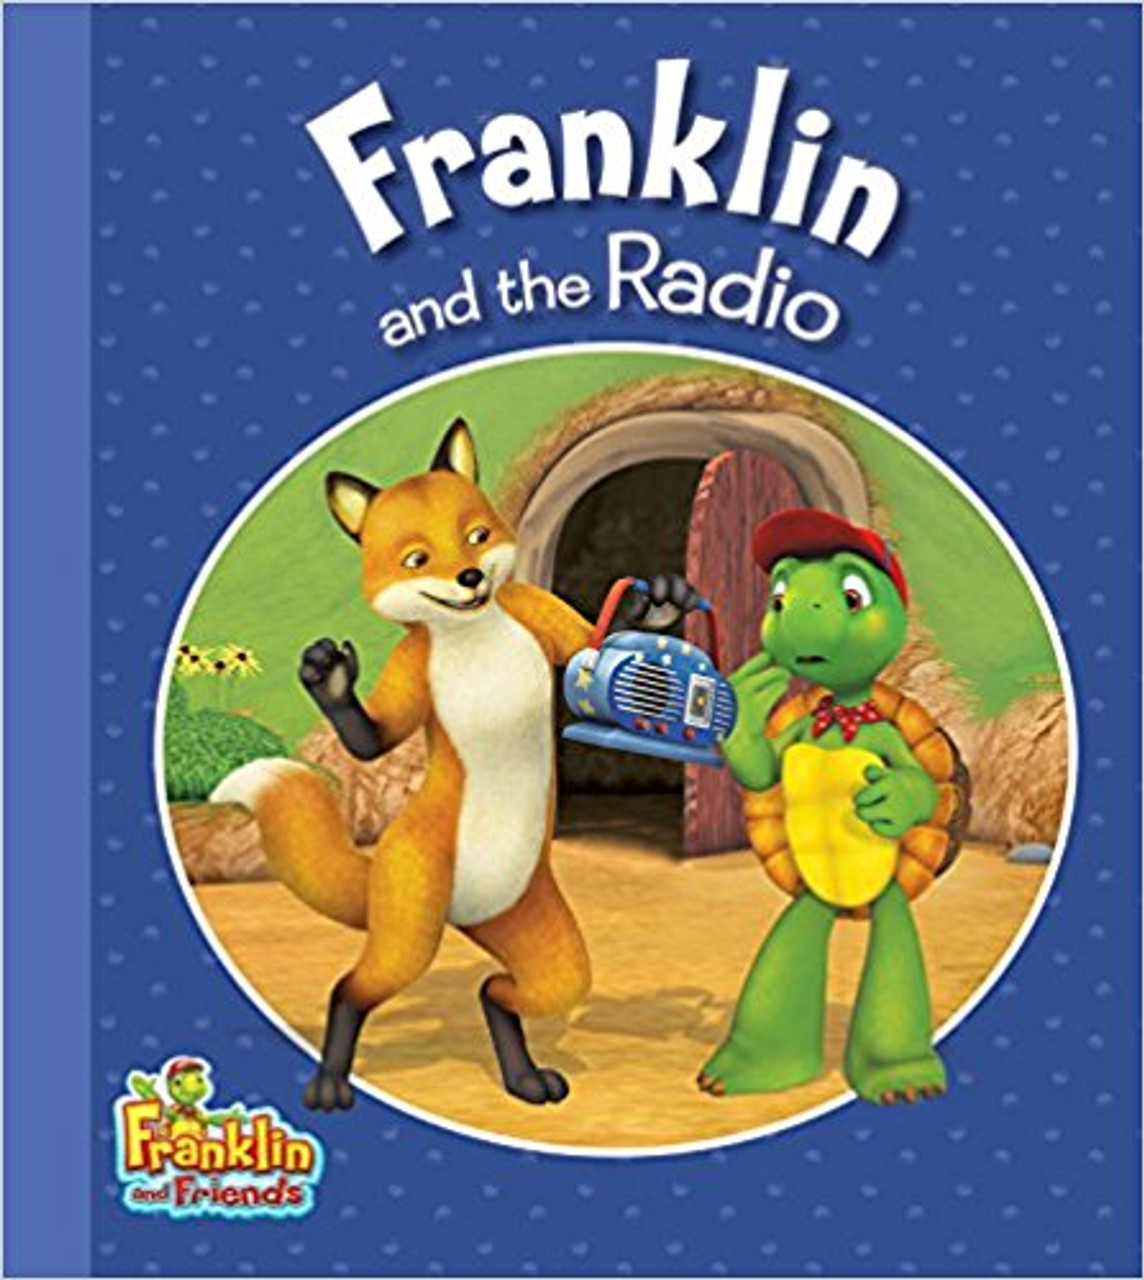 Franklin and the Radio by Caitlin Drake Smith